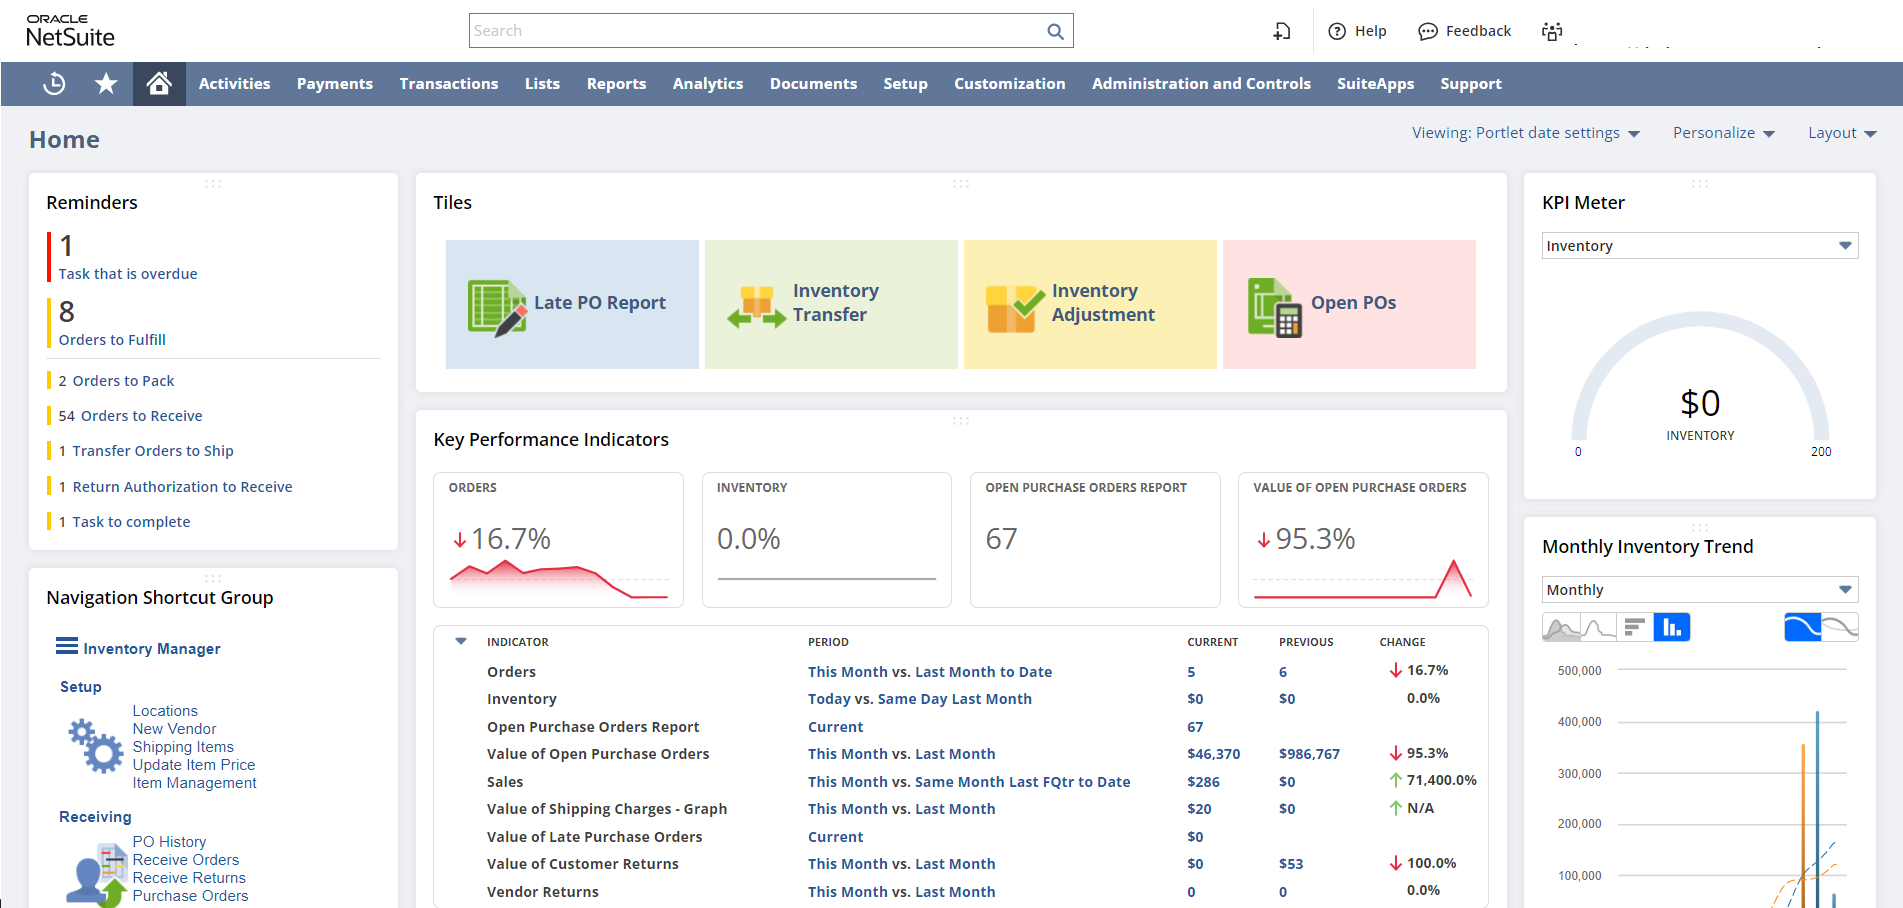 Image showing NetSuite Inventory Management Dashboard